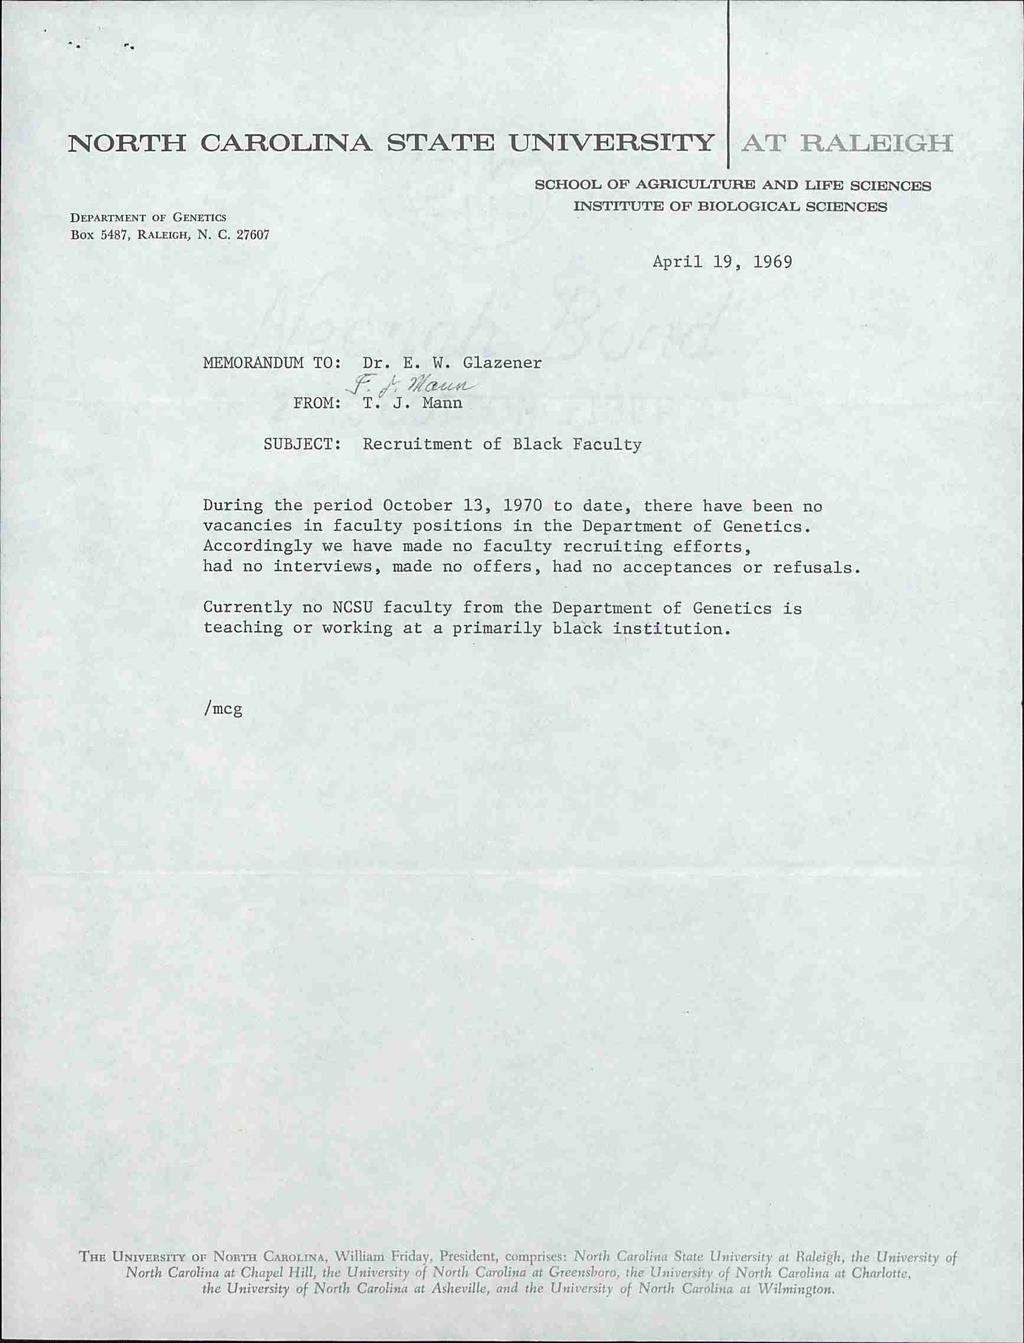 AT :RALEIGH. DEPARTMENT OF GENETICS Box 5487, RALEIGH, N. C. 27607 SCHOOL OF AGRICULTURE AND LIFE SCIENCES INSTITUTE OF BIOLOGICAL SCIENCES April 19, 1969 MEMORANDUM TO: Dr. E. W. Glazener.